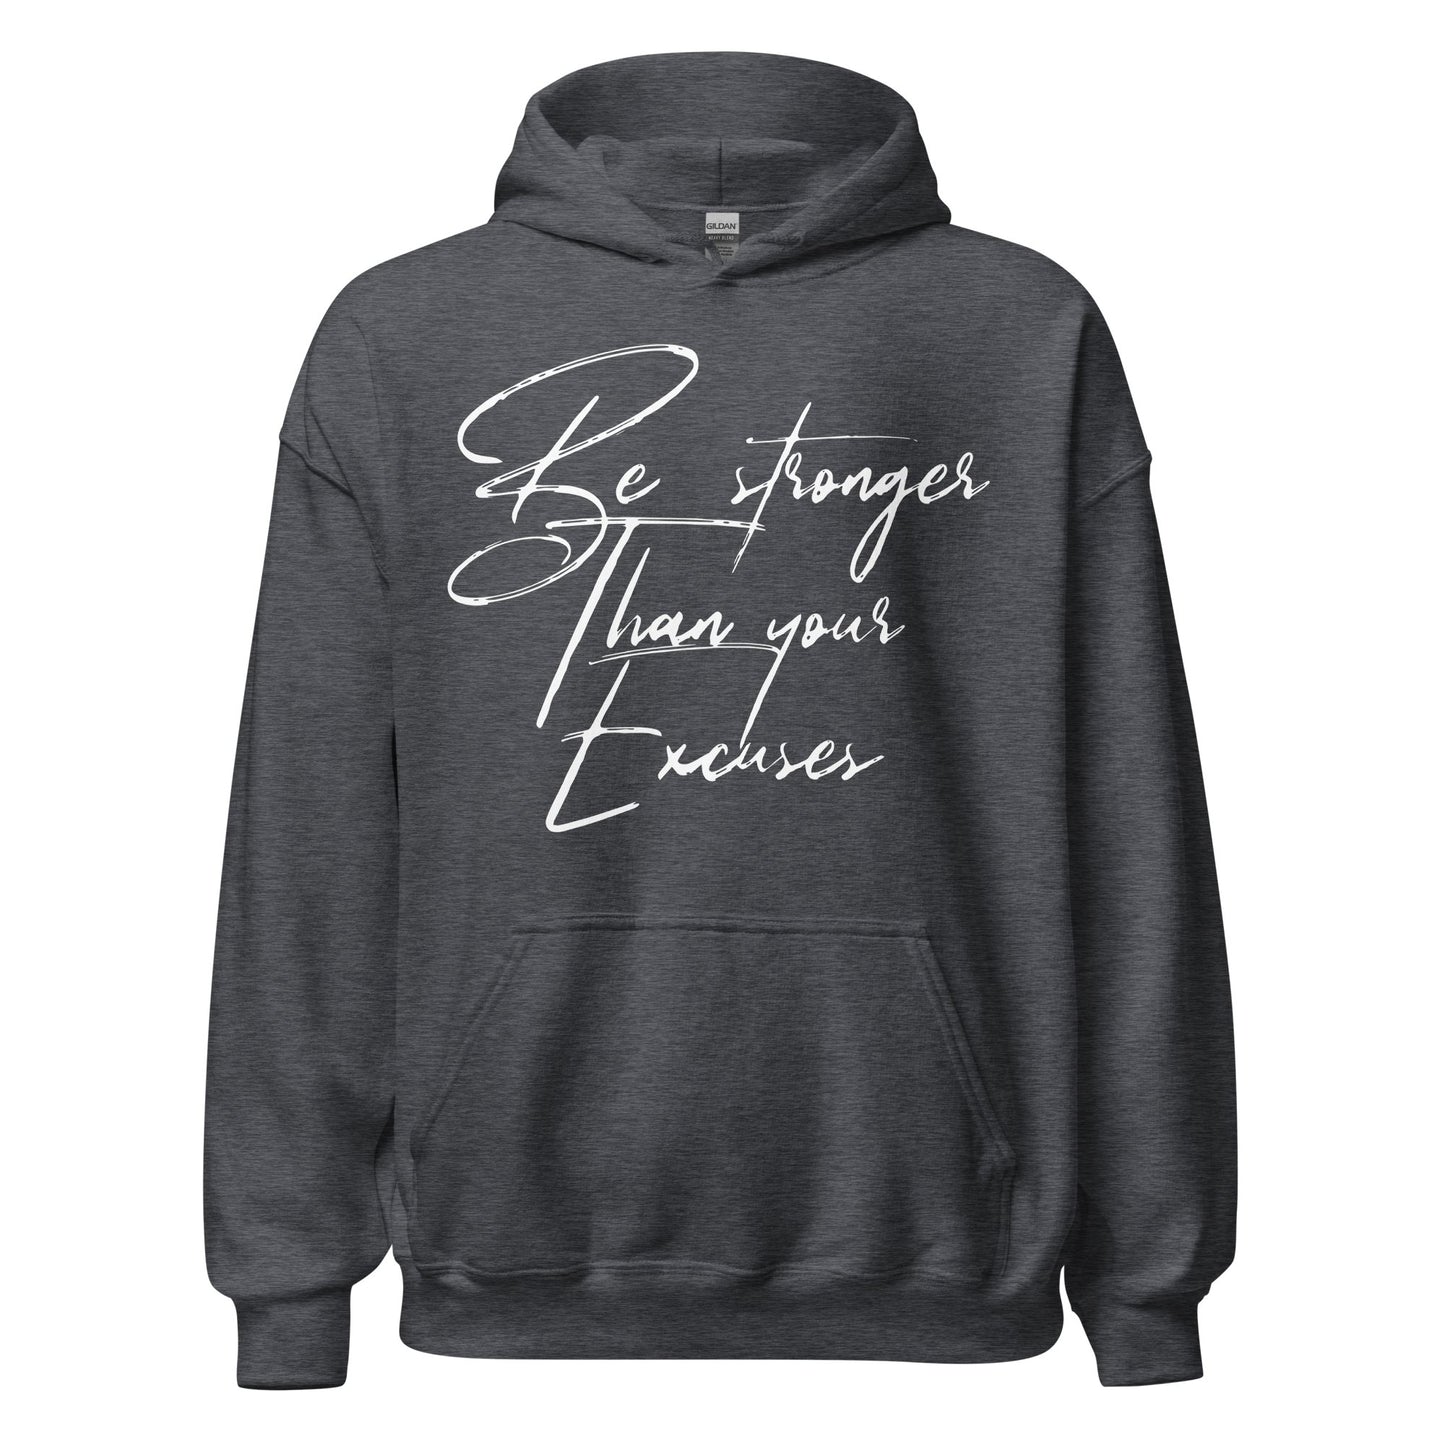 Fall Stronger Than Your Excuses Hoodie